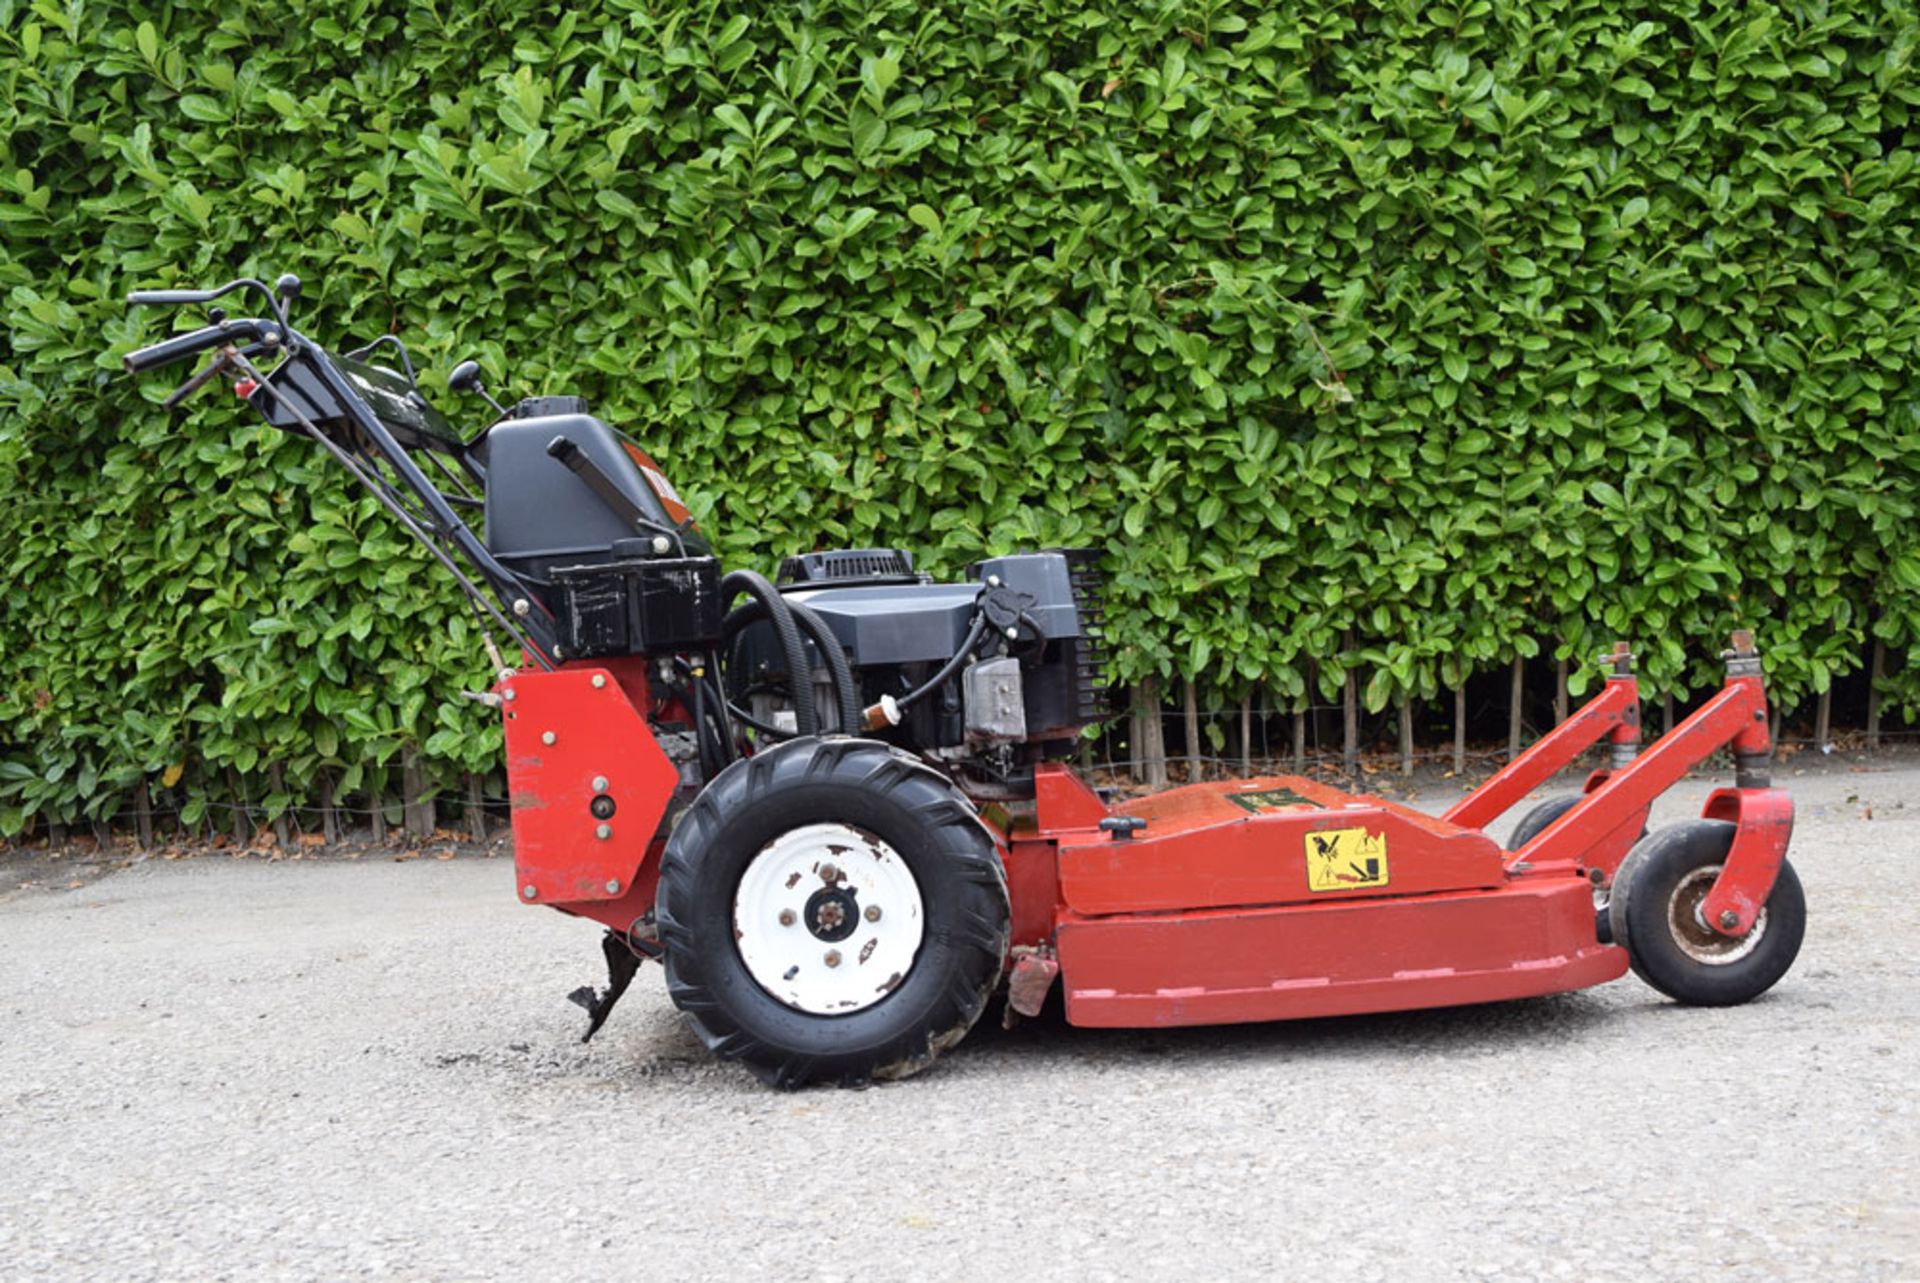 Toro Commercial Pedestrian 32" Commercial Walk Behind Zero Turn Rotary Mower - Image 2 of 6